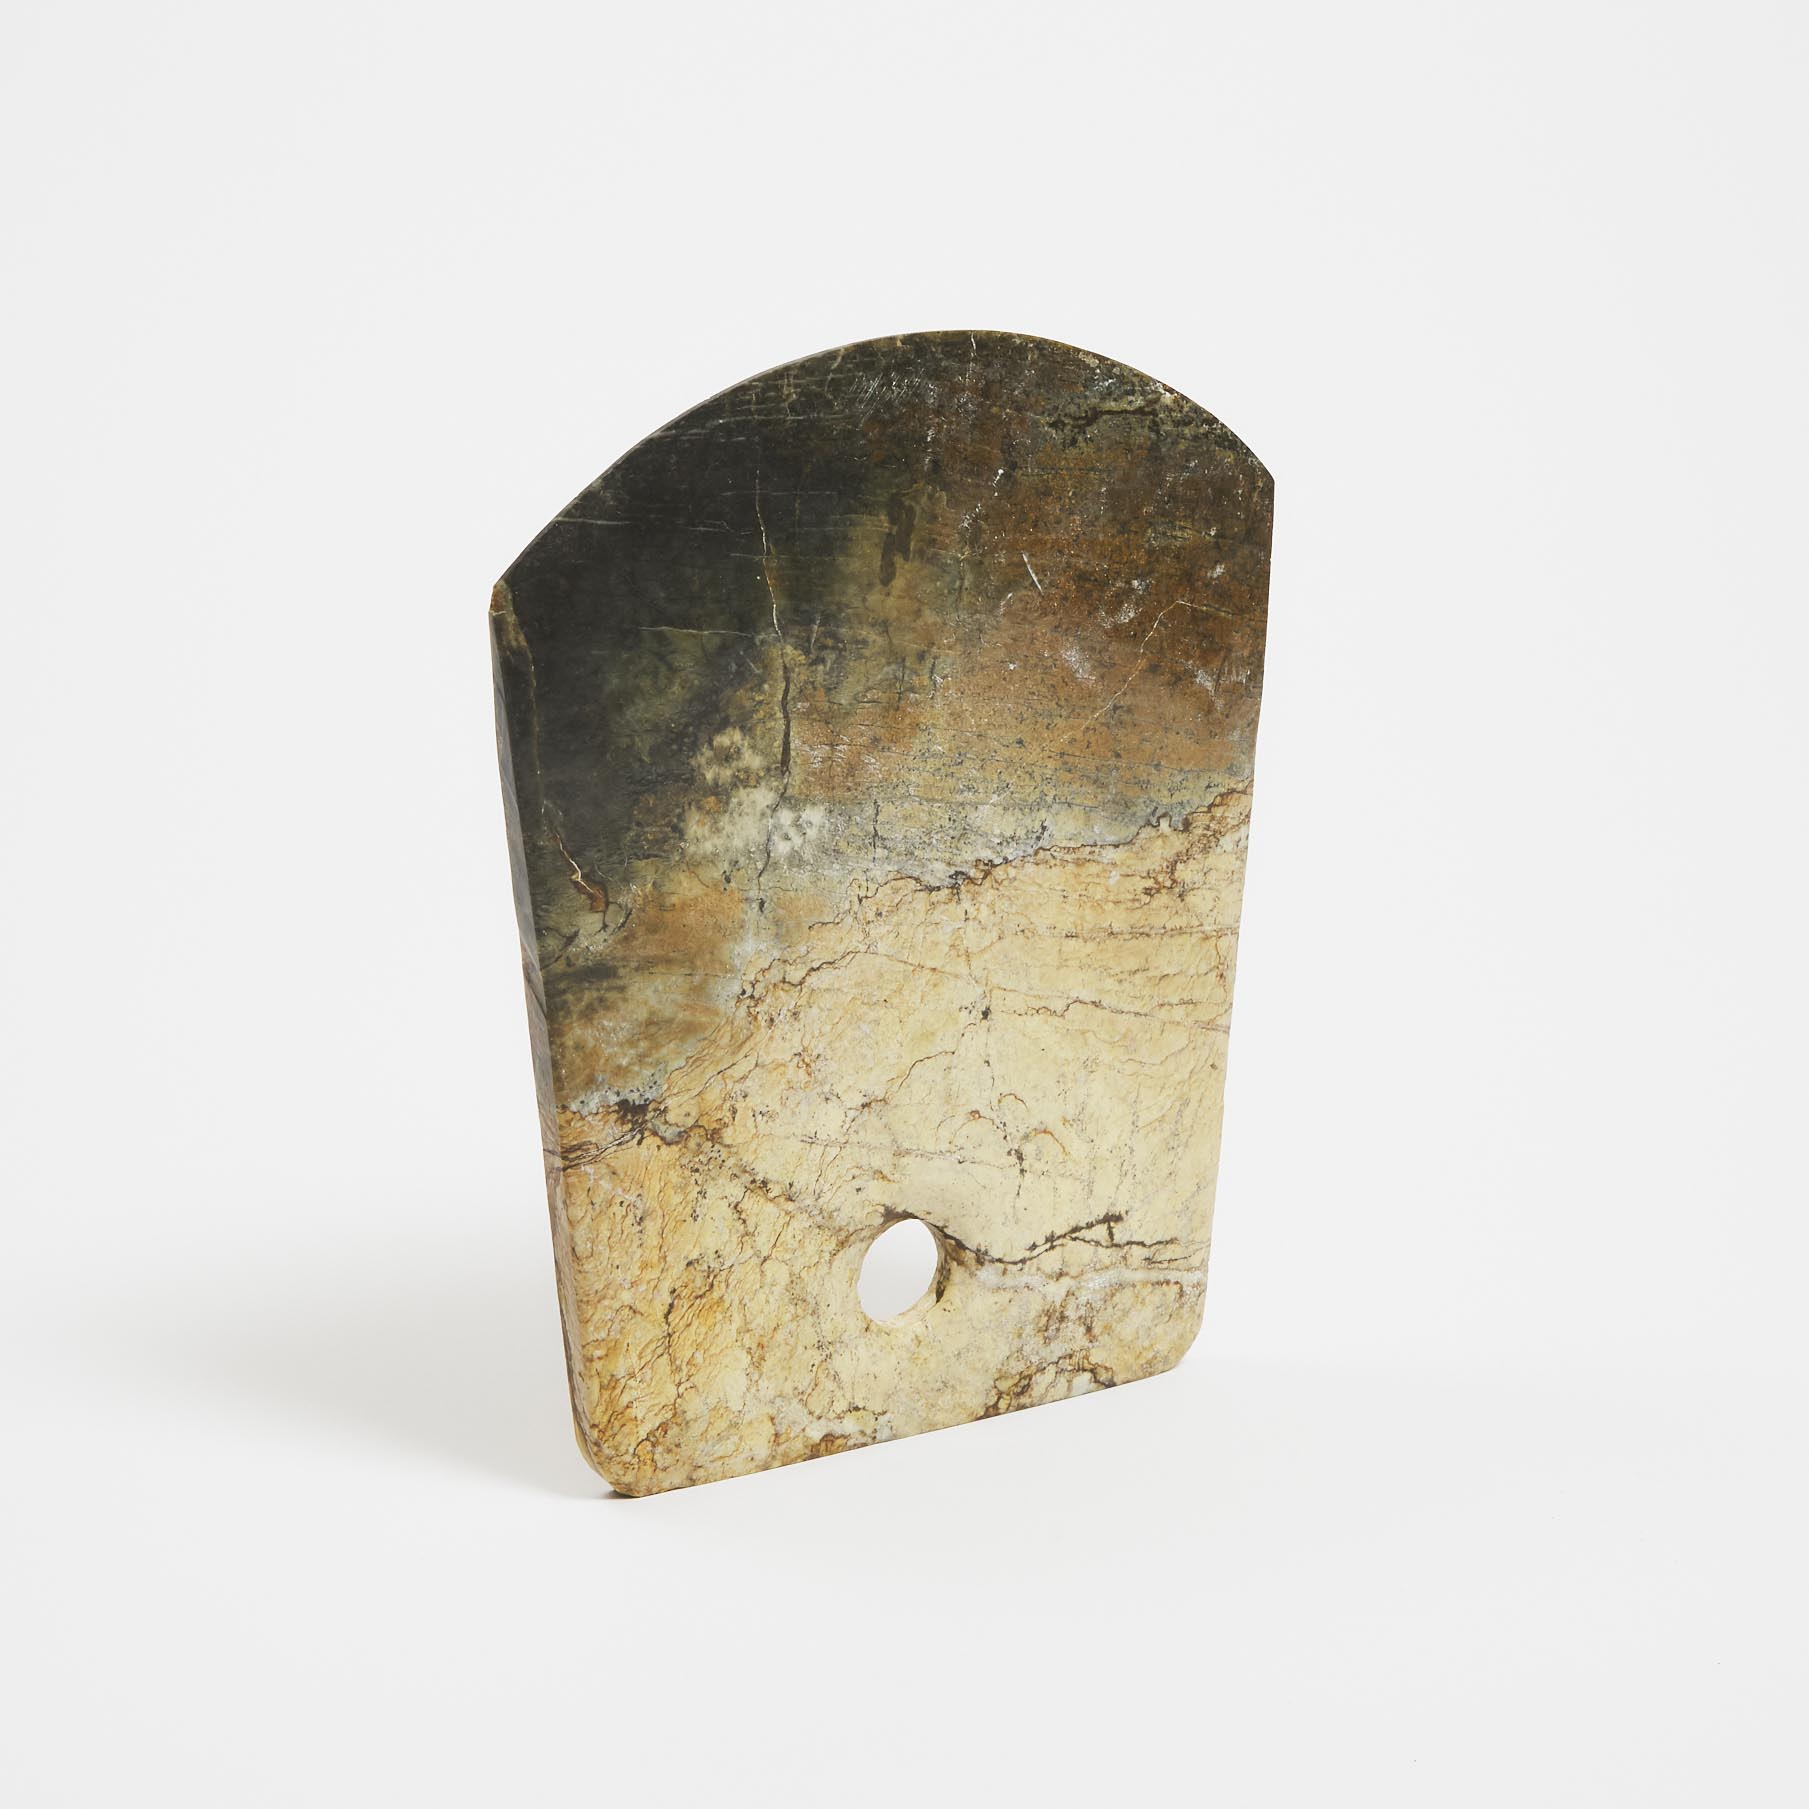 A Liangzhu Neolithic-Style Hardstone Axe